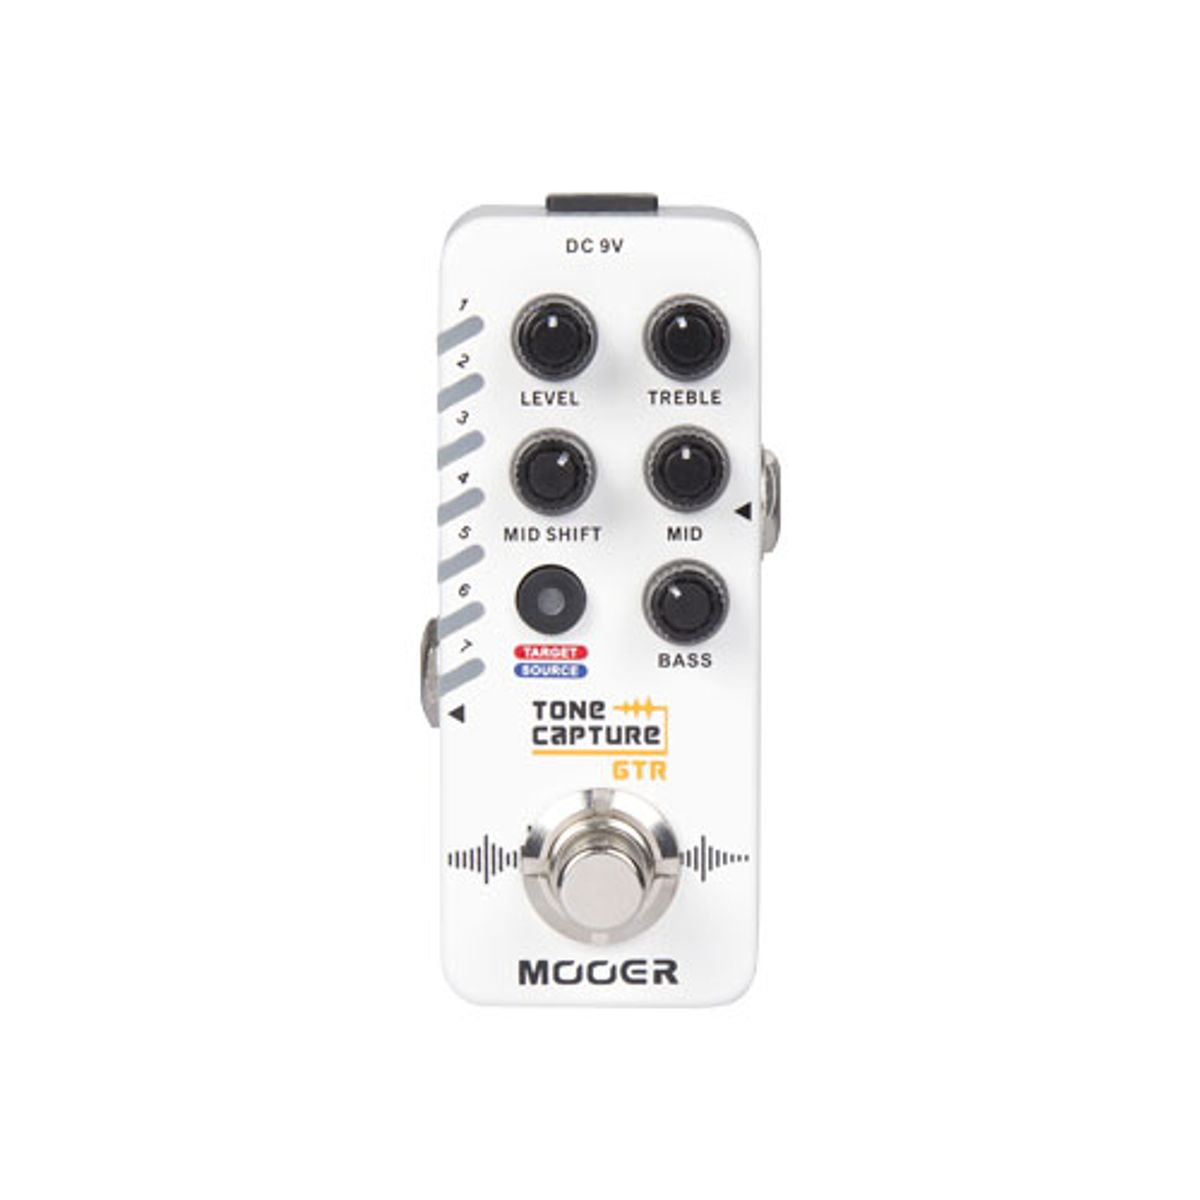 Mooer Audio Announces the Tone Capture Pedal and CT01 Tuner